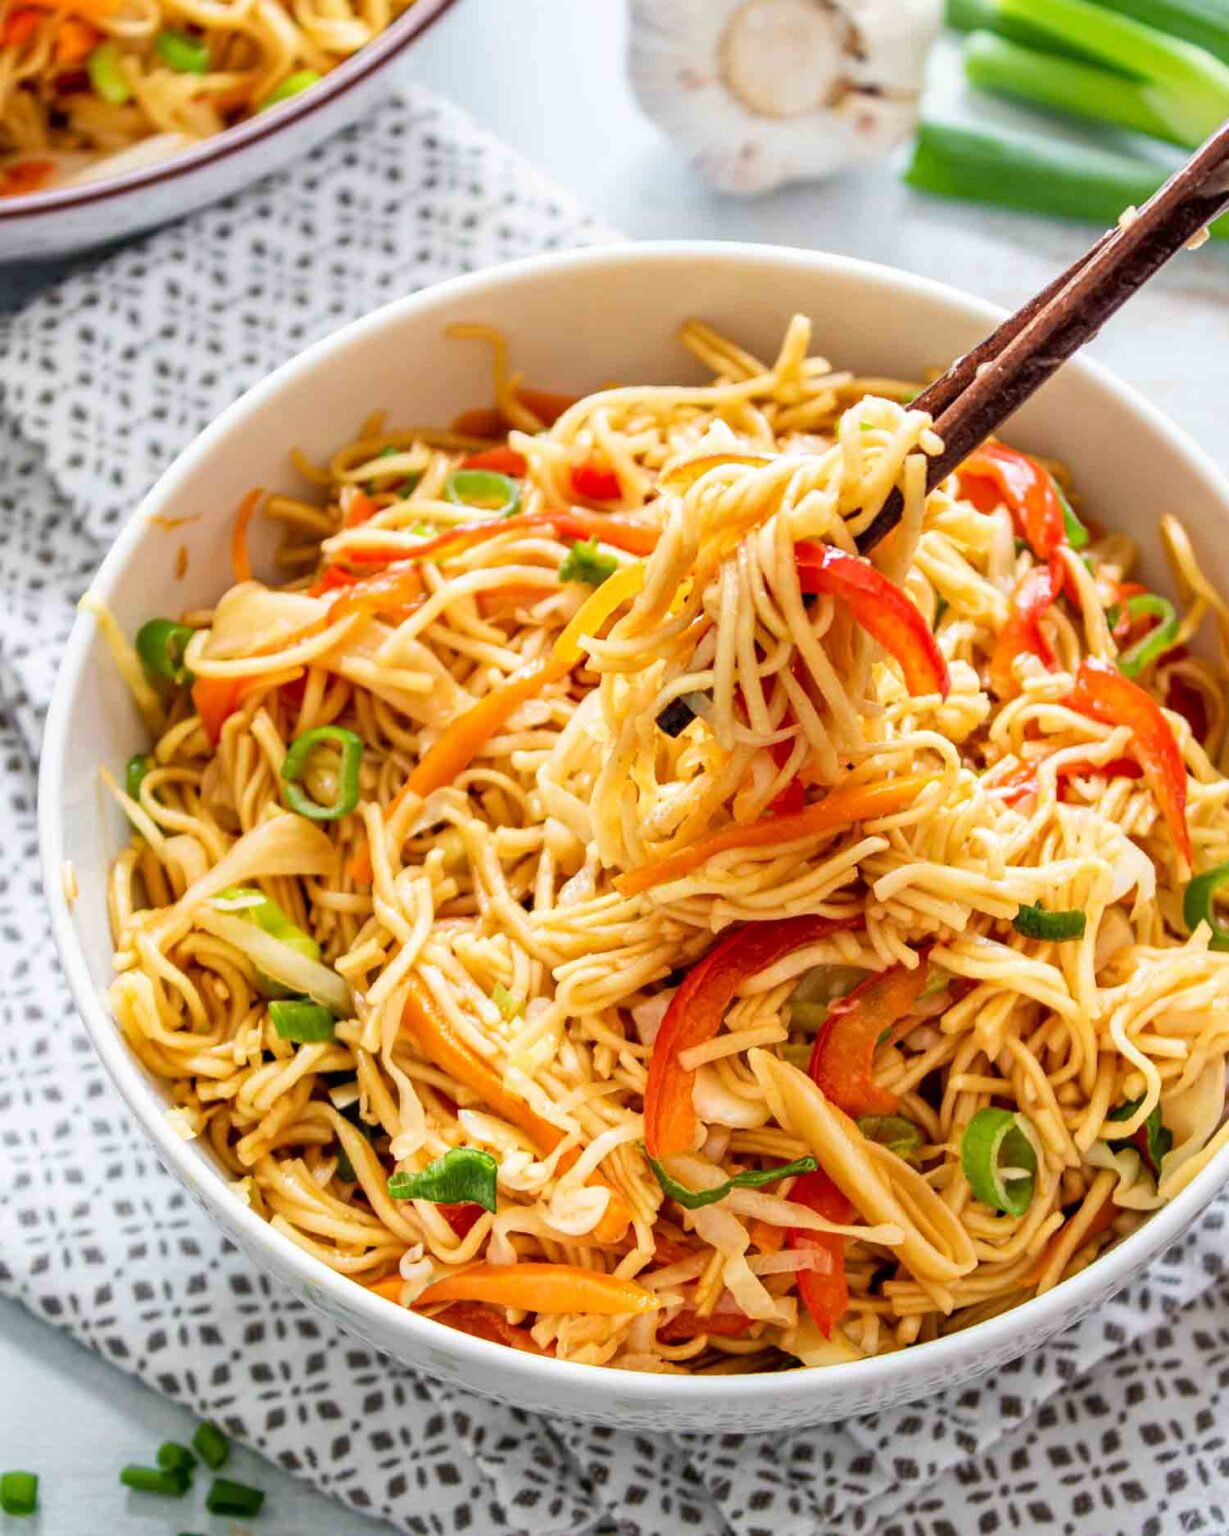 Chow Mein - Craving Home Cooked